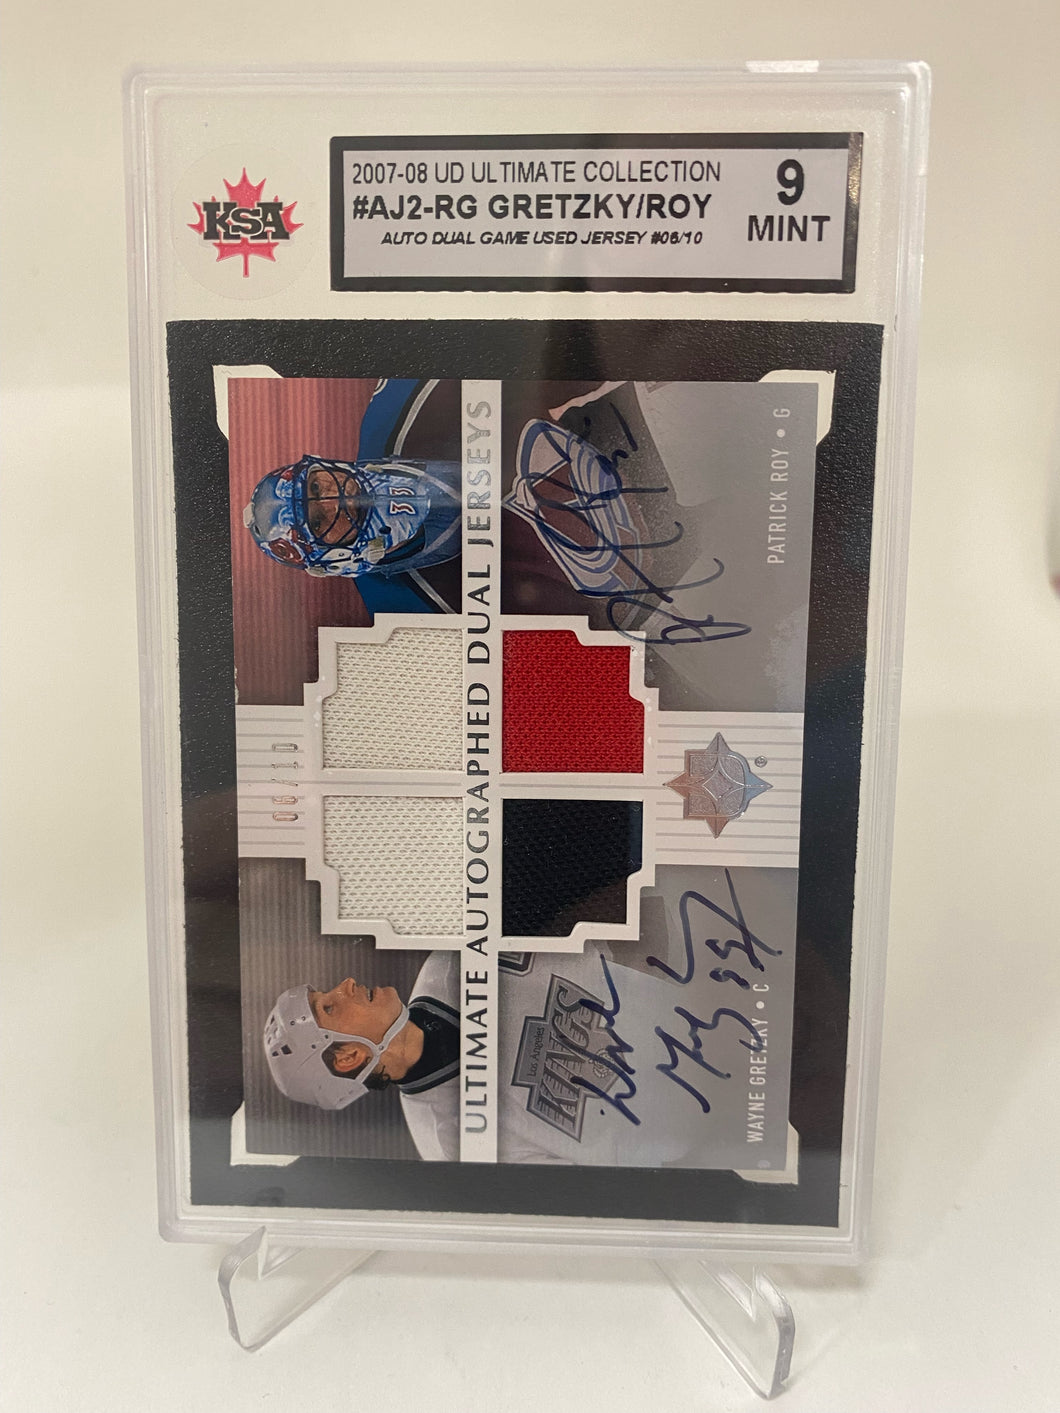 2007-08 UD Ultimate Collection #AJ2-RG Gretzky/Roy Auto Dual Game Used Jersey /10 KSA 9